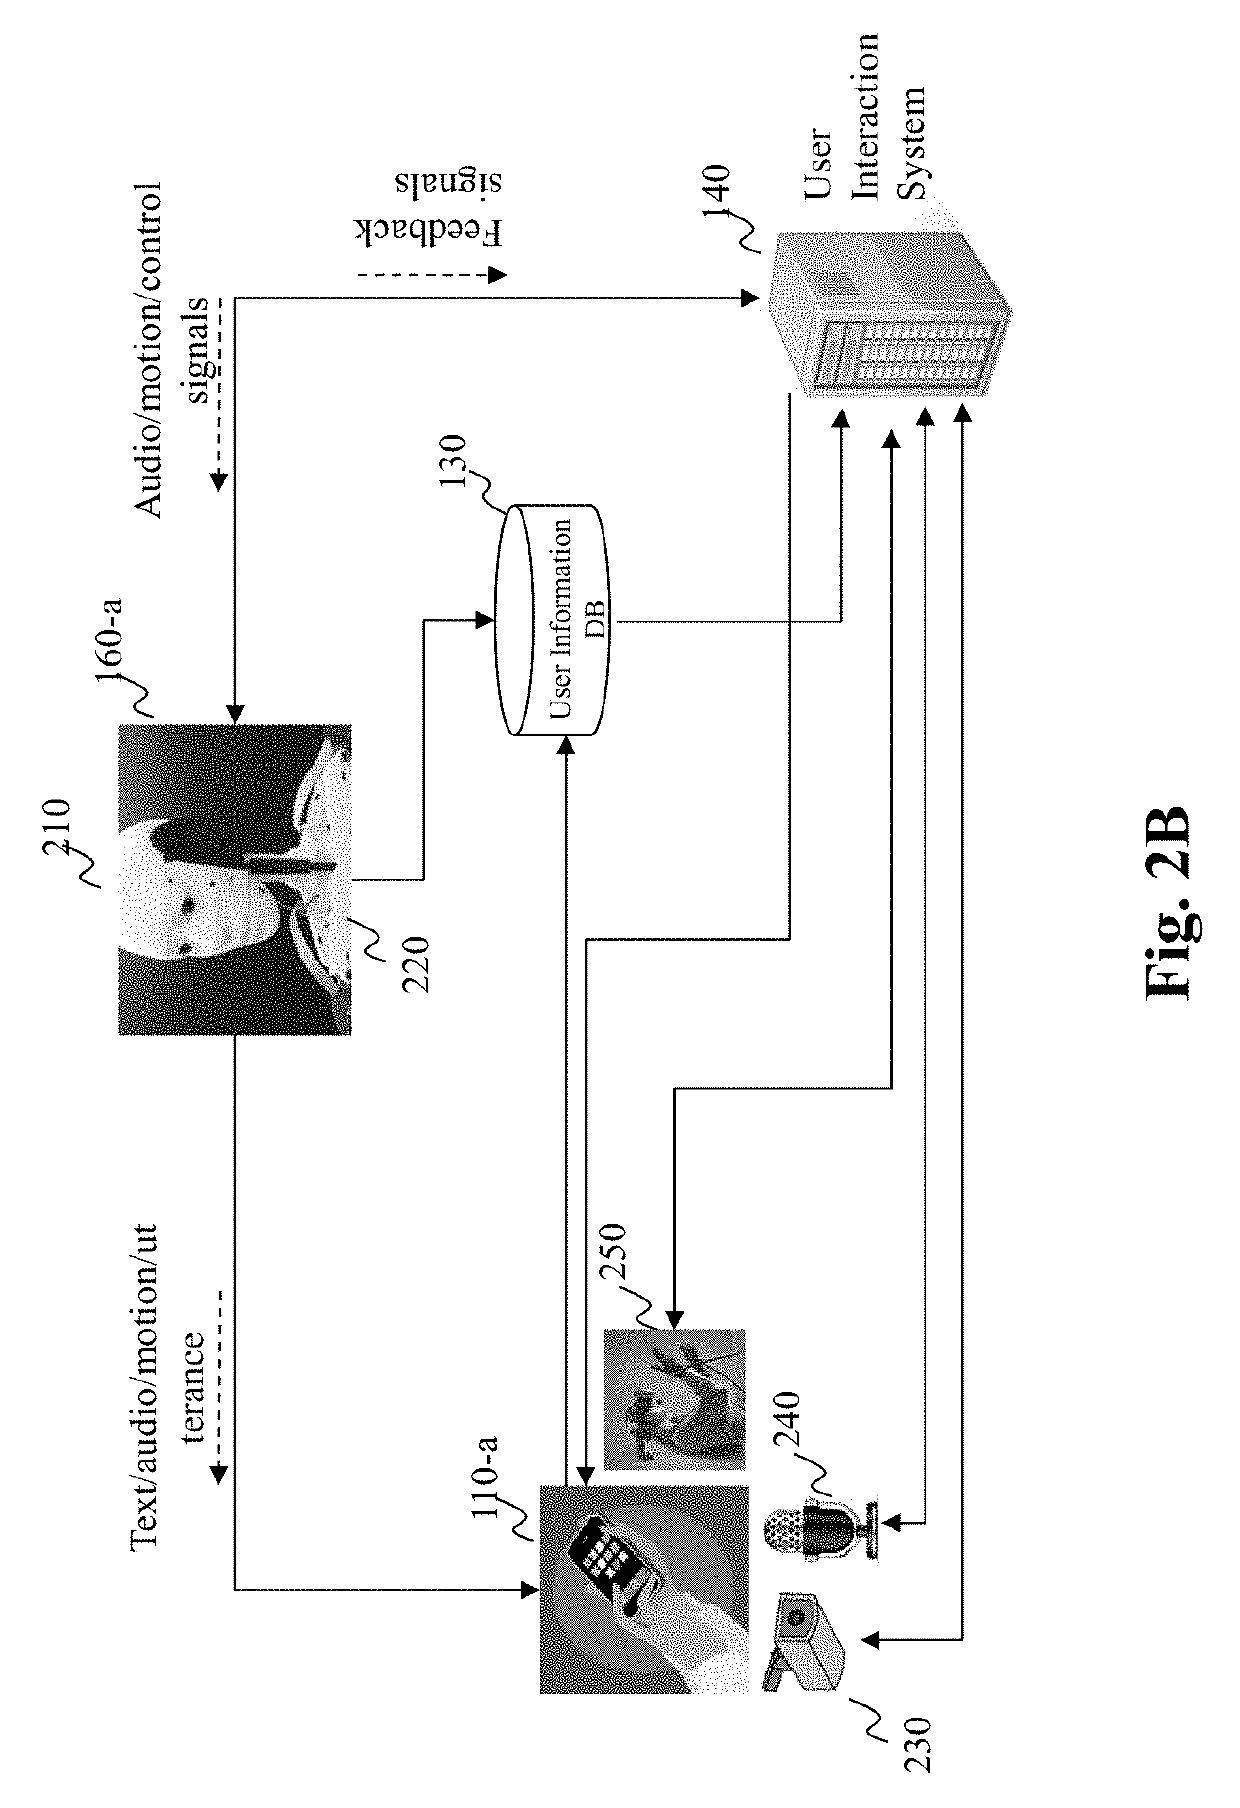 System and method for speech understanding via integrated audio and visual based speech recognition